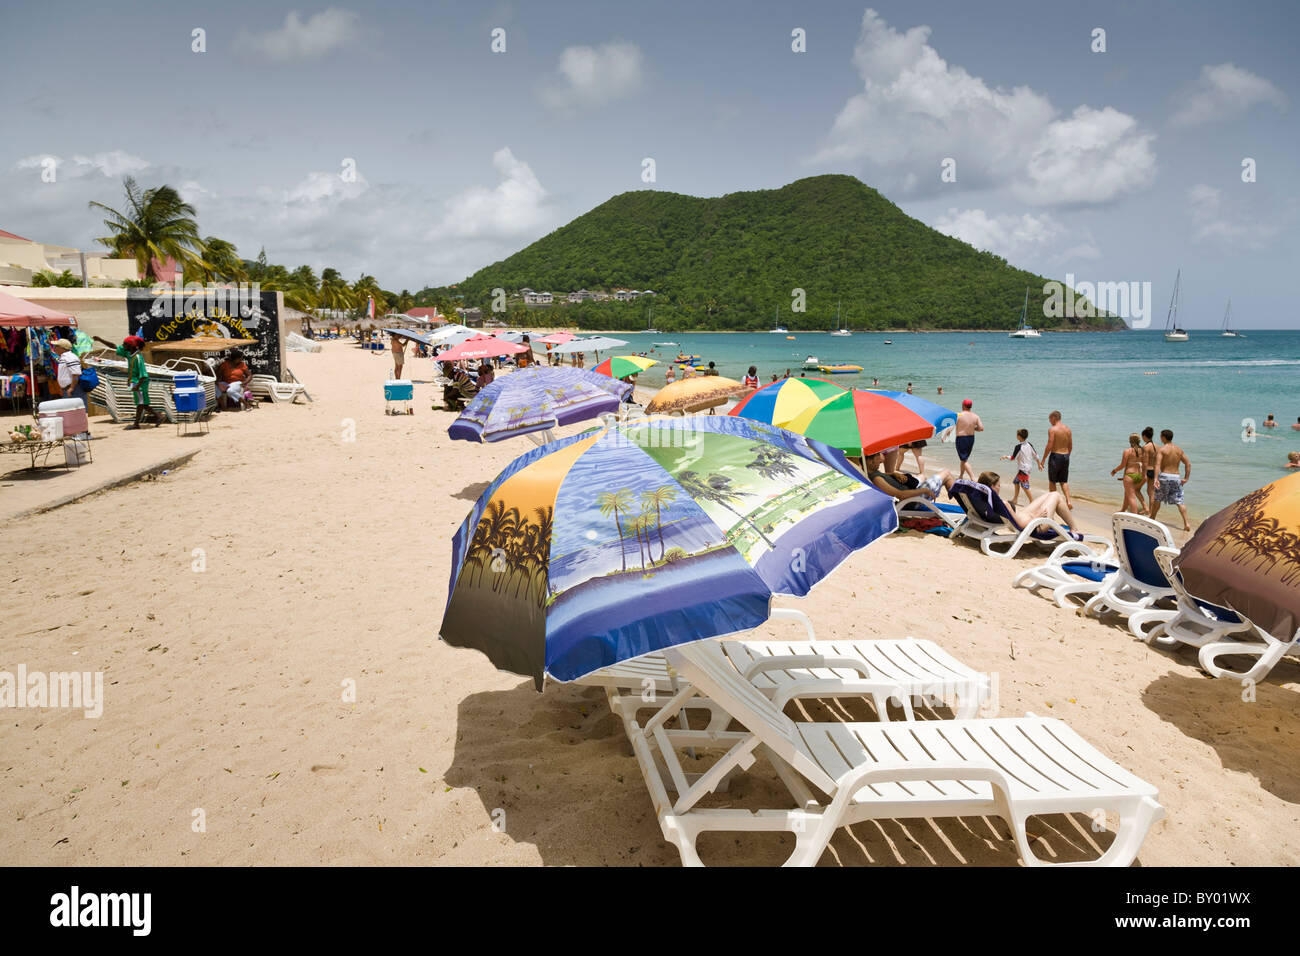 Sunloungers and sunbathers on the beach at Reduit Beach, St Lucia. Stock Photo